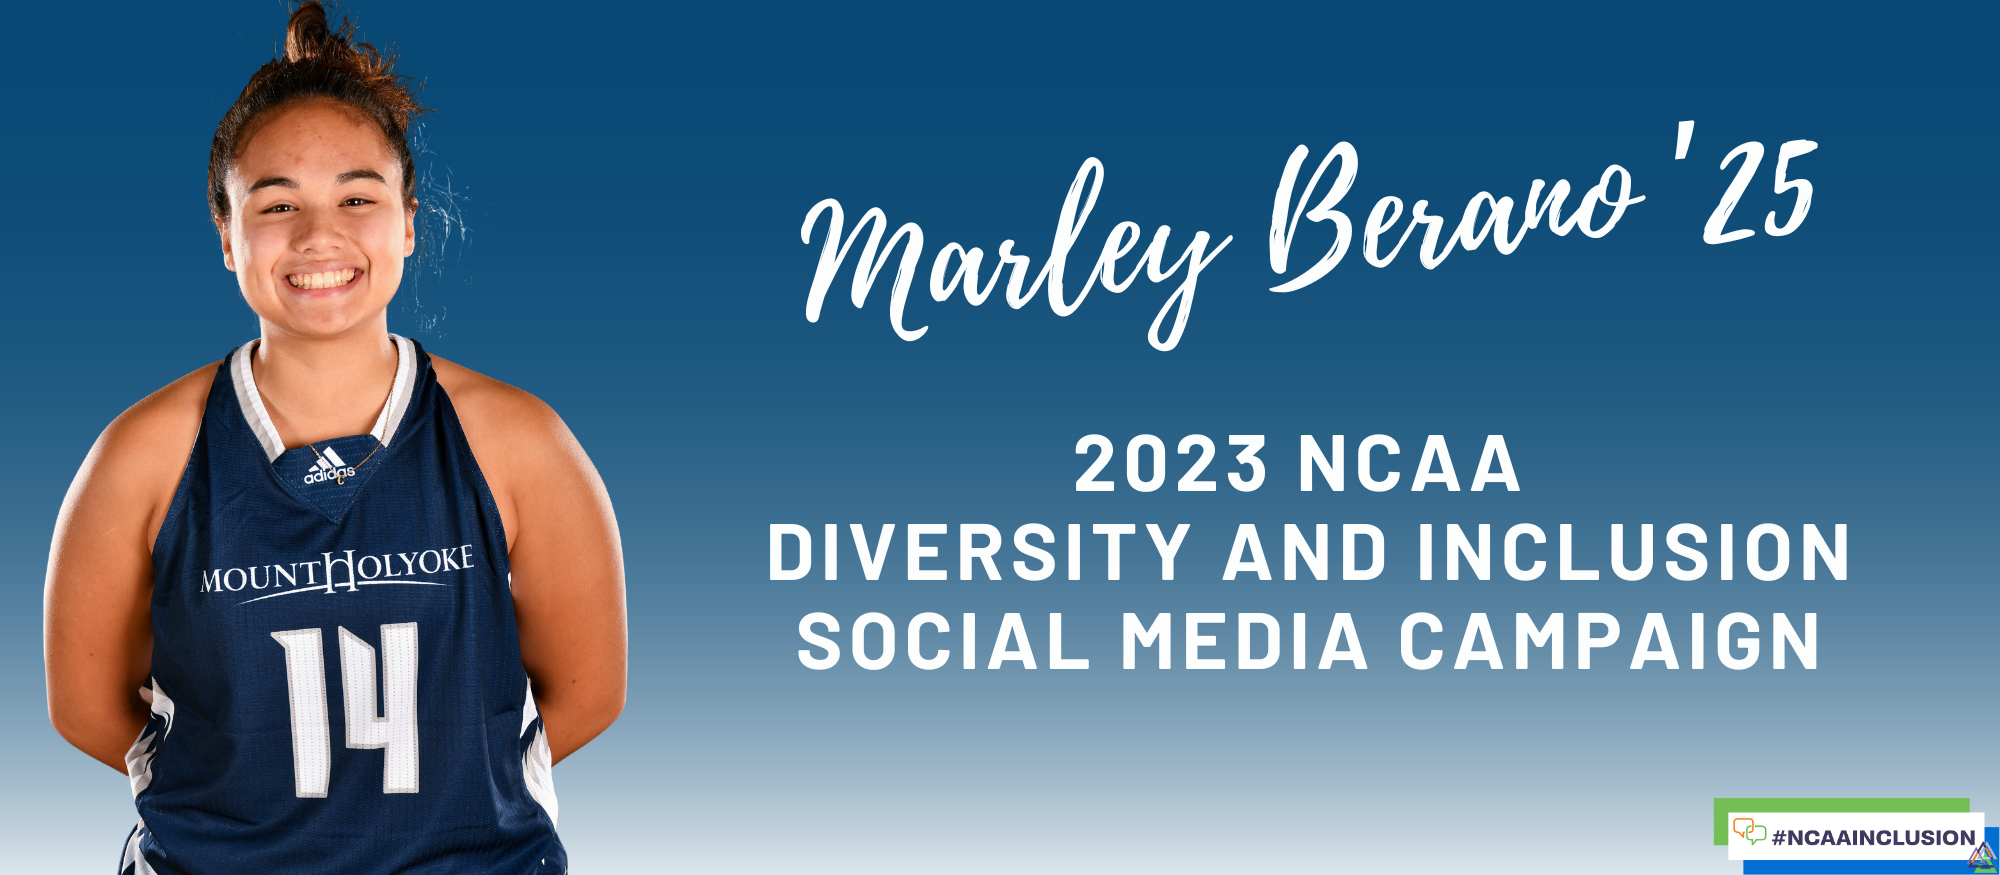 Marley Berano: the driving force behind MHC's 2023 Diversity and Inclusion campaign